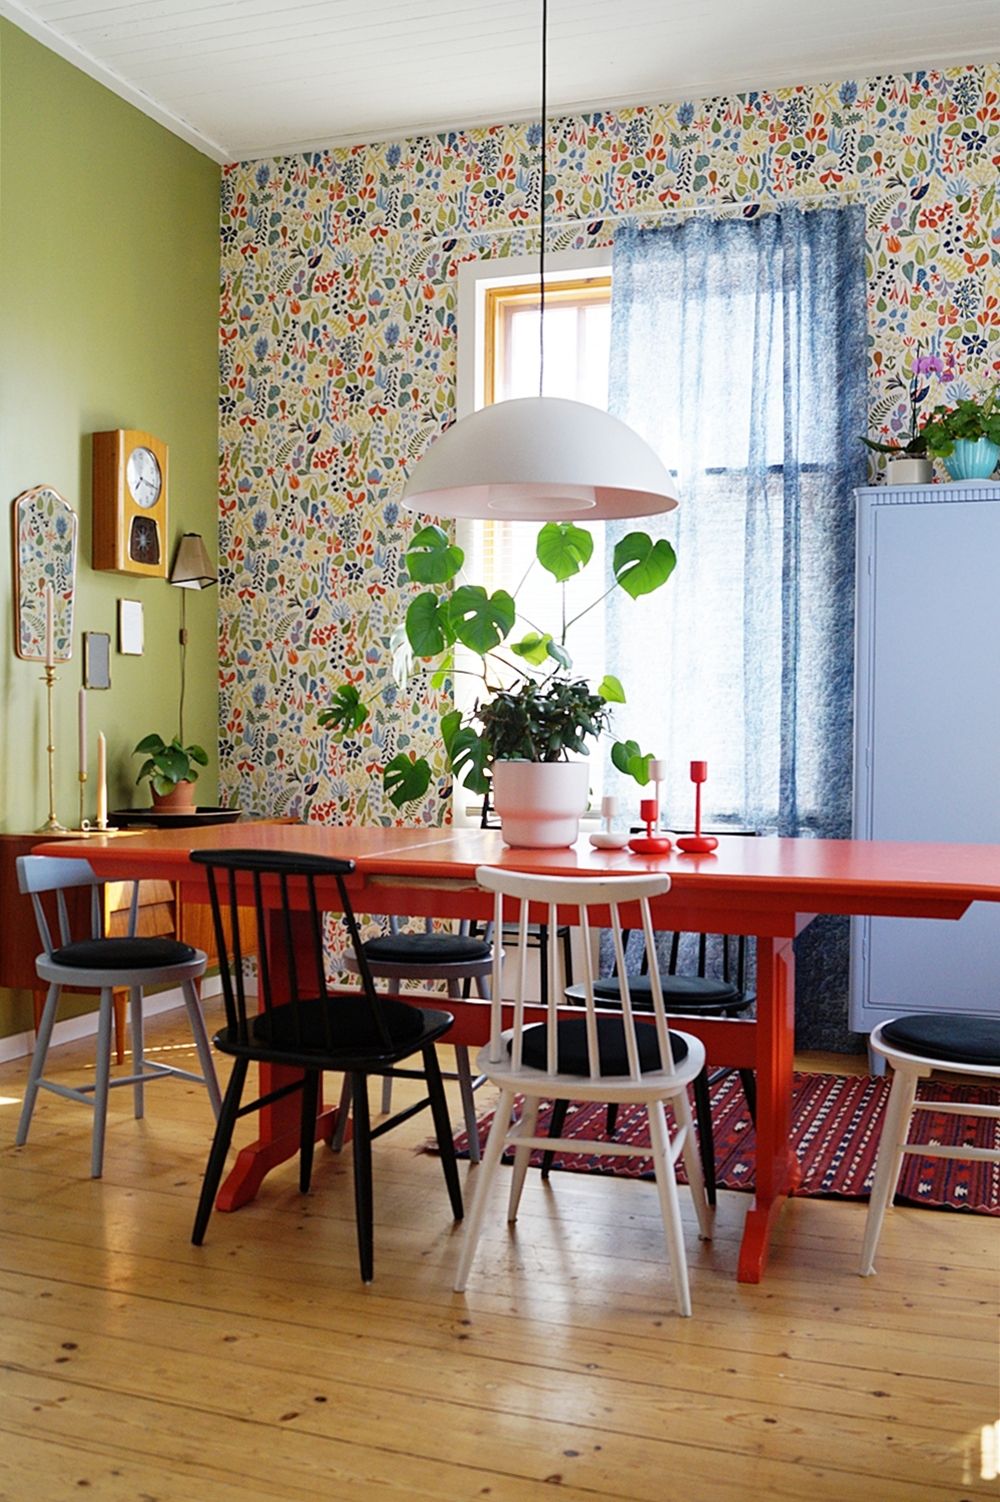 Combination of Flowery Wallpaper and the Plain Wall